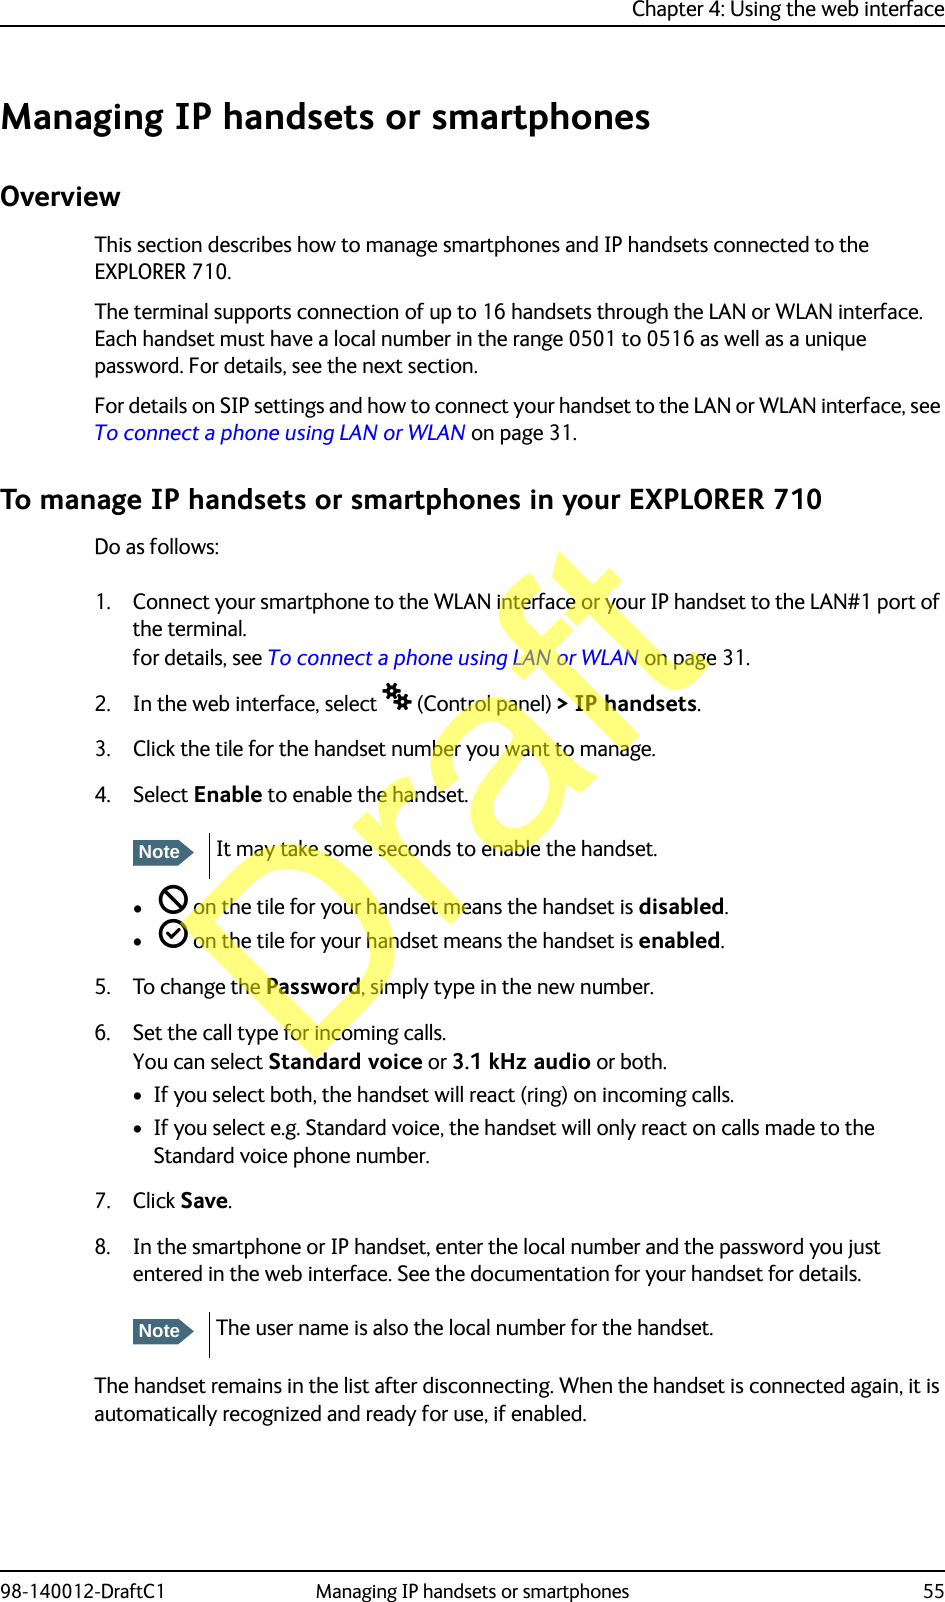 Chapter 4: Using the web interface98-140012-DraftC1 Managing IP handsets or smartphones 55Managing IP handsets or smartphonesOverviewThis section describes how to manage smartphones and IP handsets connected to the EXPLORER 710.The terminal supports connection of up to 16 handsets through the LAN or WLAN interface. Each handset must have a local number in the range 0501 to 0516 as well as a unique password. For details, see the next section.For details on SIP settings and how to connect your handset to the LAN or WLAN interface, see To connect a phone using LAN or WLAN on page 31.To manage IP handsets or smartphones in your EXPLORER 710Do as follows:1. Connect your smartphone to the WLAN interface or your IP handset to the LAN#1 port of the terminal.for details, see To connect a phone using LAN or WLAN on page 31.2. In the web interface, select  (Control panel) &gt; IP handsets.3. Click the tile for the handset number you want to manage.4. Select Enable to enable the handset.•  on the tile for your handset means the handset is disabled.•  on the tile for your handset means the handset is enabled.5. To change the Password, simply type in the new number.6. Set the call type for incoming calls.You can select Standard voice or 3.1 kHz audio or both. • If you select both, the handset will react (ring) on incoming calls. • If you select e.g. Standard voice, the handset will only react on calls made to the Standard voice phone number.7. Click Save.8. In the smartphone or IP handset, enter the local number and the password you just entered in the web interface. See the documentation for your handset for details.The handset remains in the list after disconnecting. When the handset is connected again, it is automatically recognized and ready for use, if enabled.NoteIt may take some seconds to enable the handset.NoteThe user name is also the local number for the handset.Draft